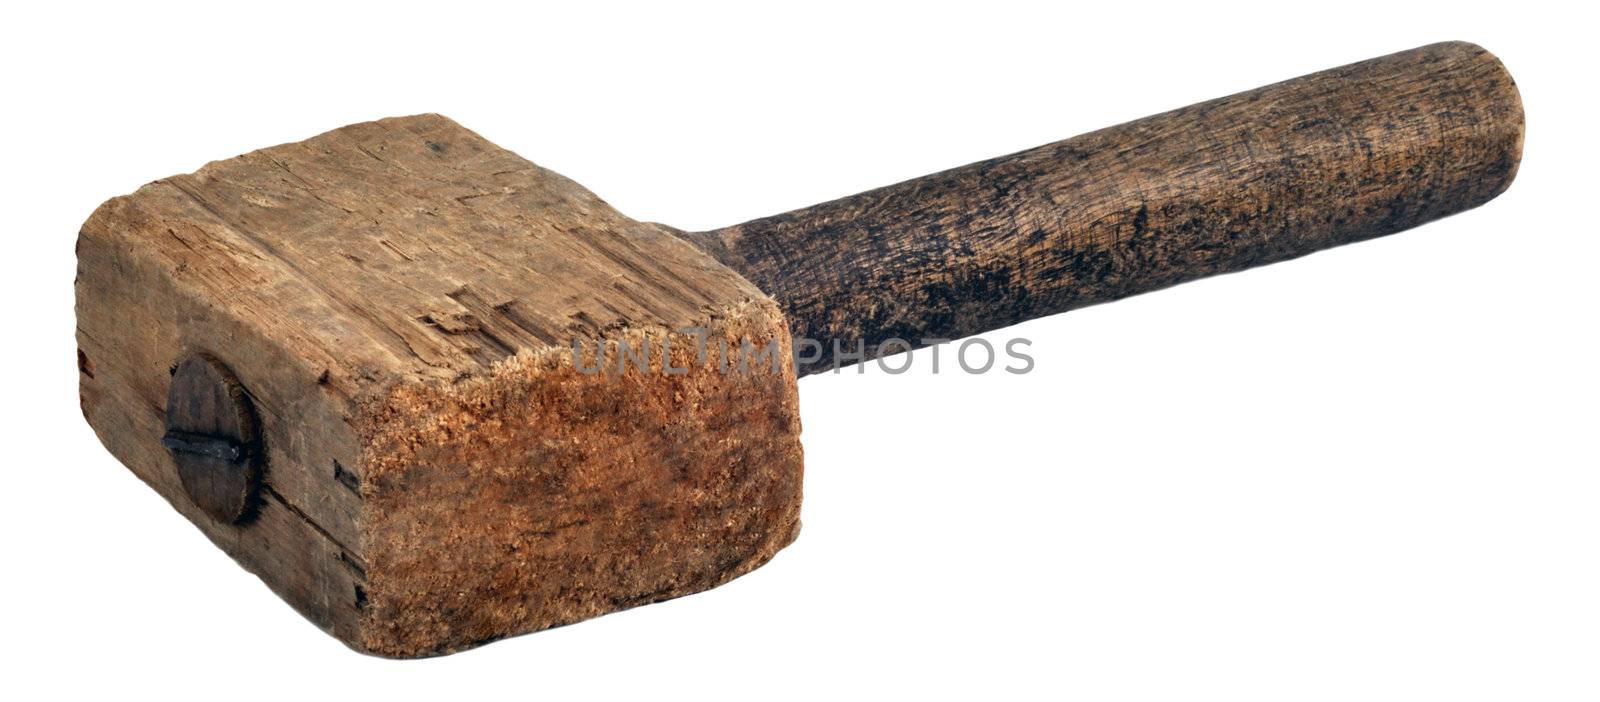 Old self-made wooden hammer (mallet). It is made in Siberia, Russia, in the middle of 20th century.